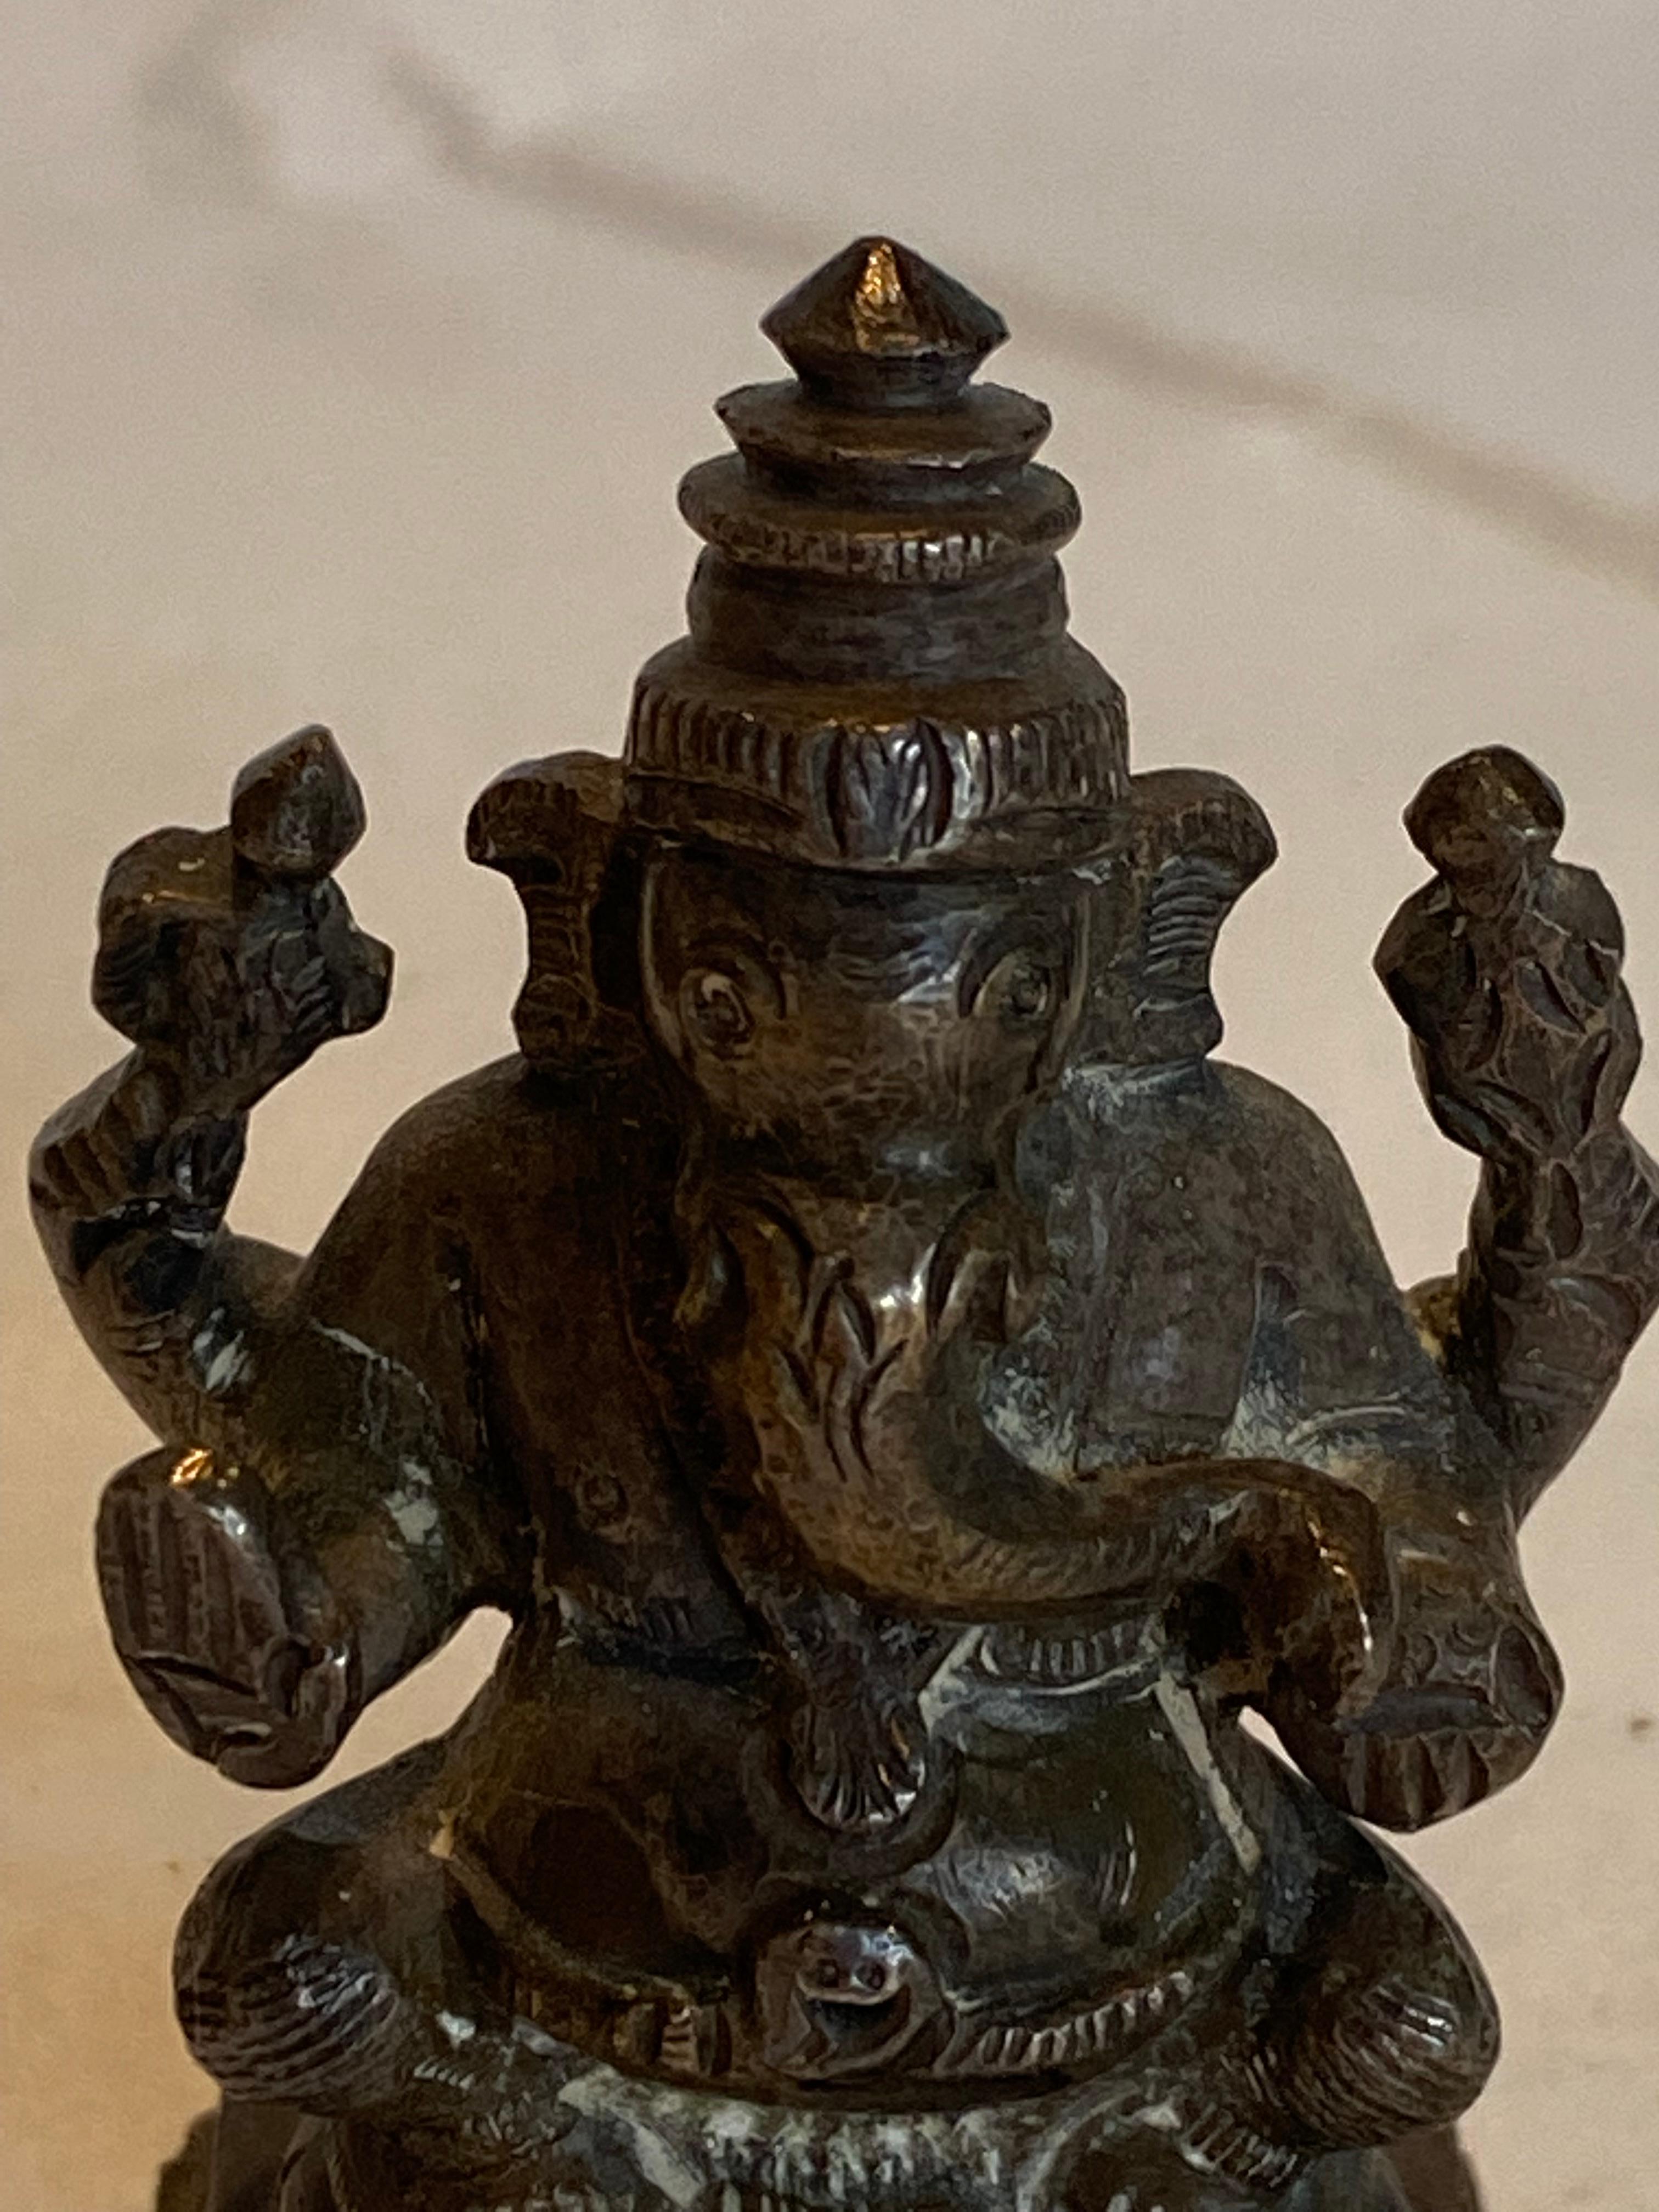 Hand-Crafted Antique Bronze Seated Ganesha with a Dog